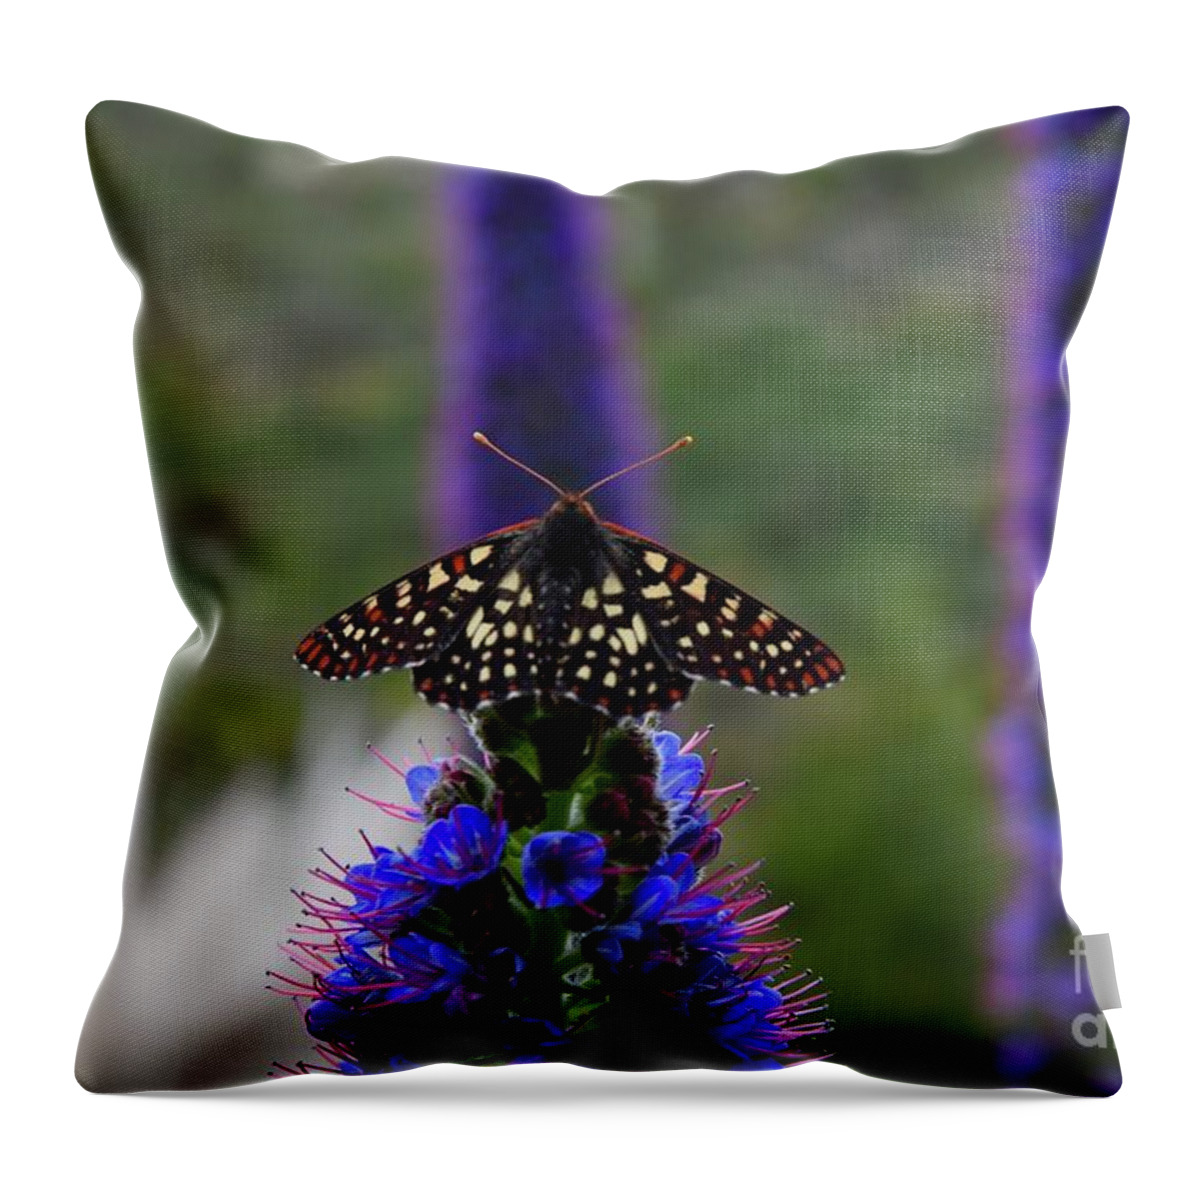 Moth Throw Pillow featuring the photograph Spotted Moth On Purple Flowers by Bruce Chevillat